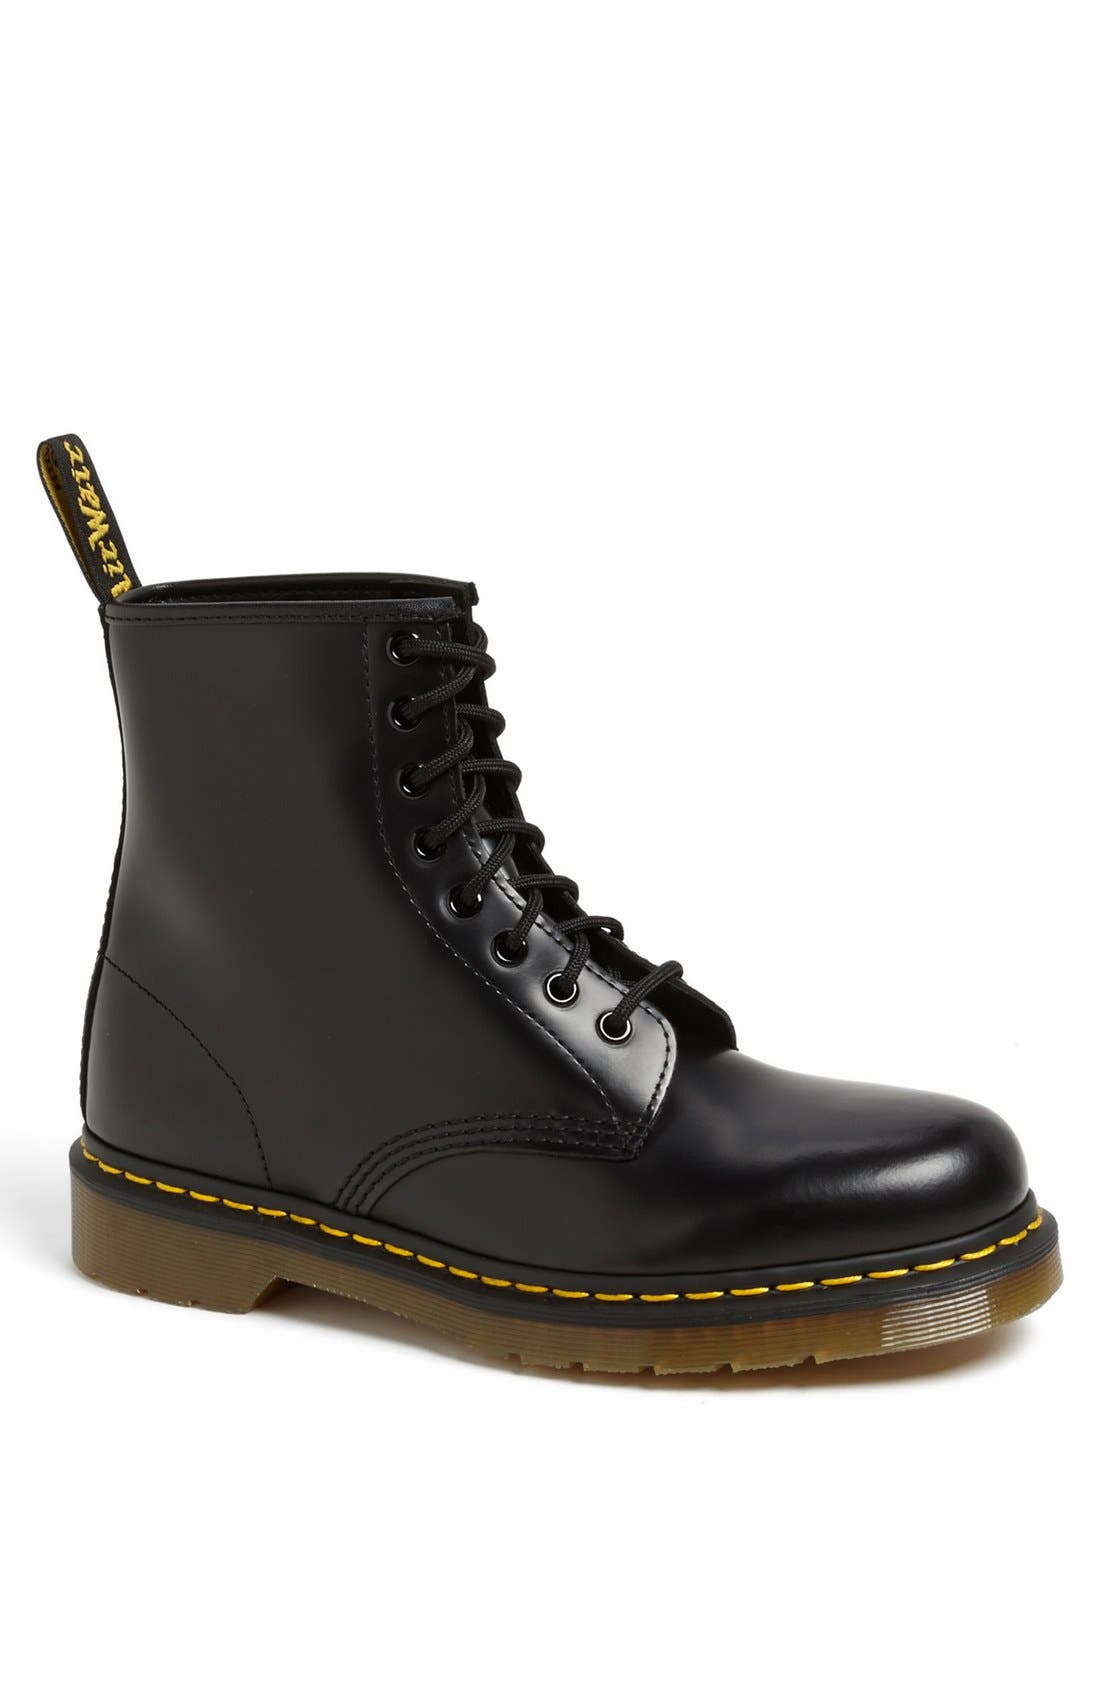 where can i buy doc marten shoes